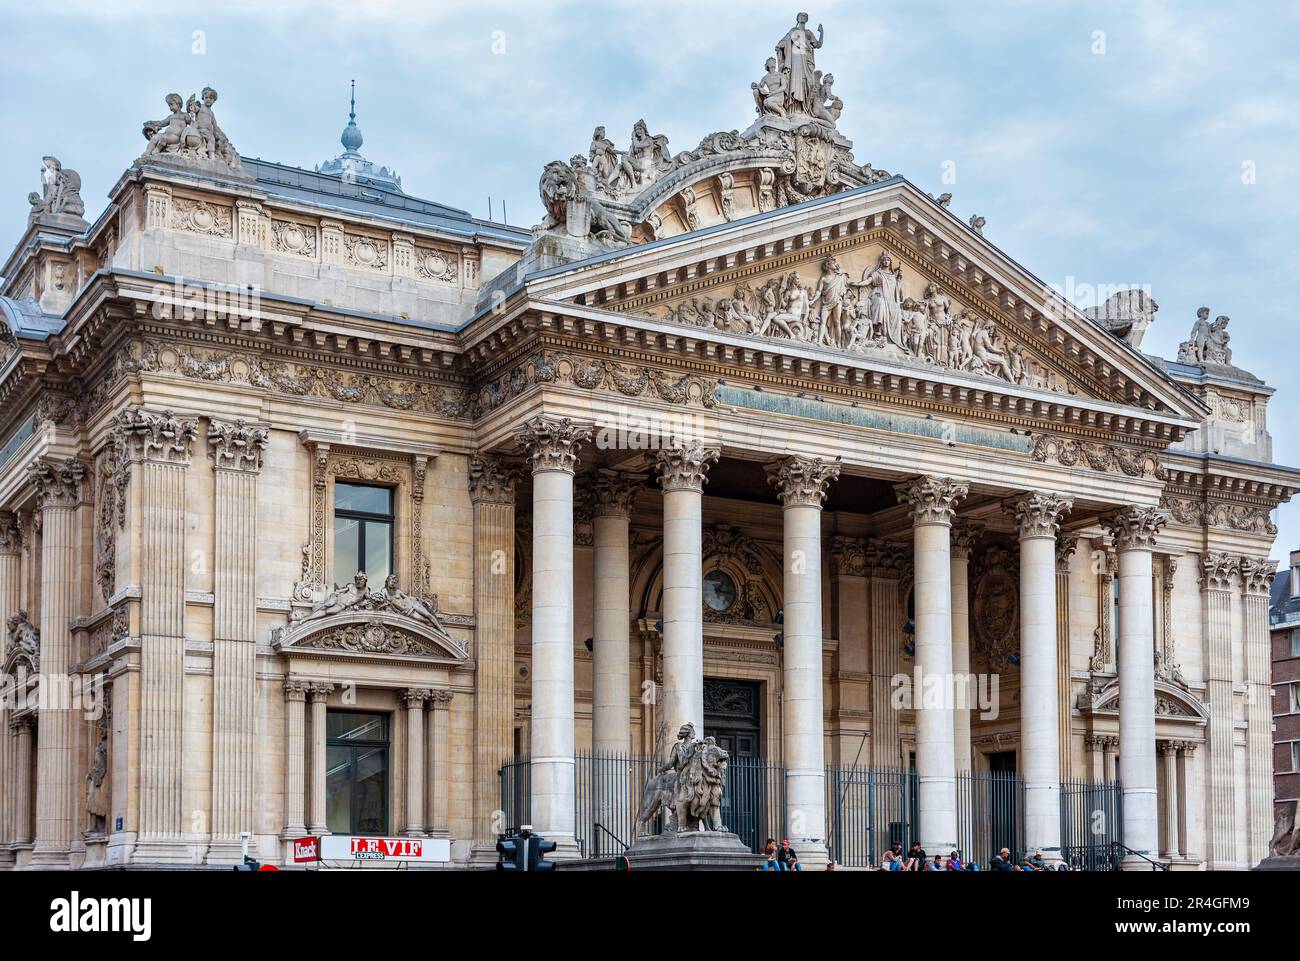 Brussels, Belgium - July 6, 2010 : Brussels Stock Exchange,  People sitting and relaxing on the steps of the Neo-Palladian financial building. Stock Photo